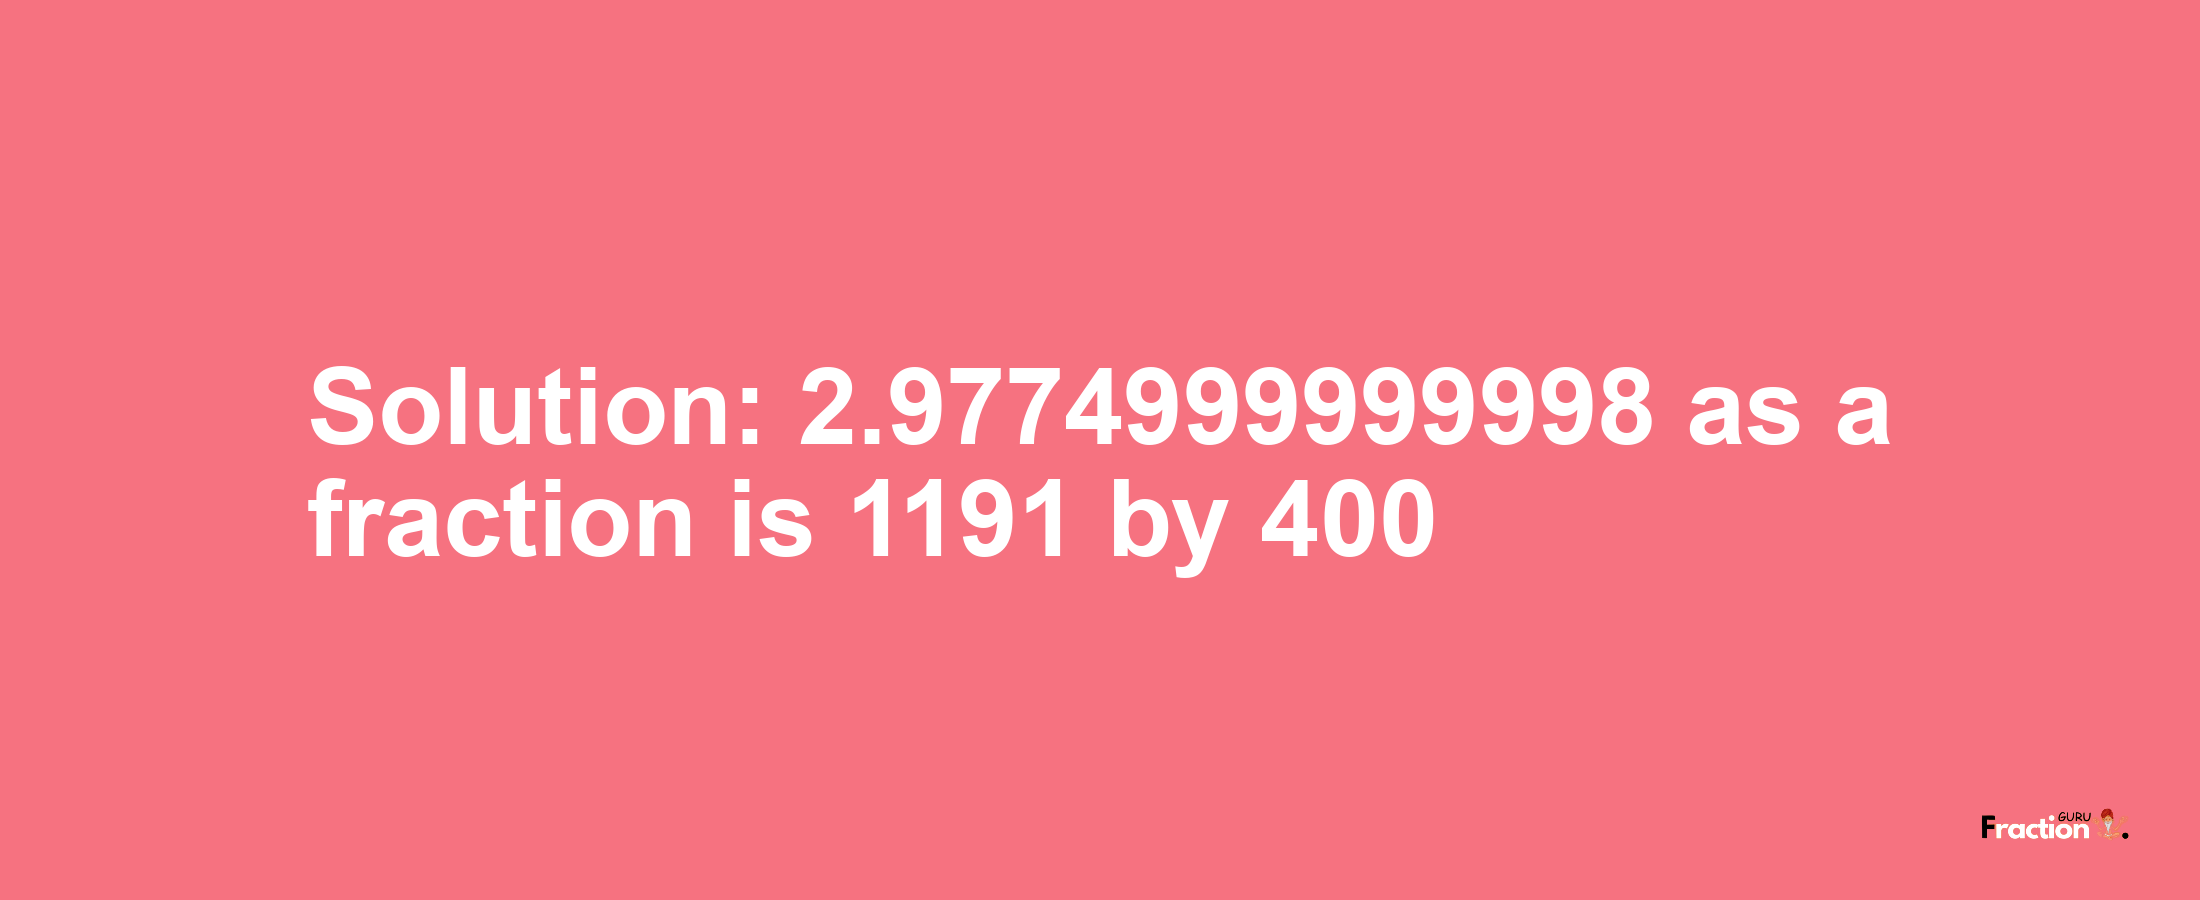 Solution:2.9774999999998 as a fraction is 1191/400